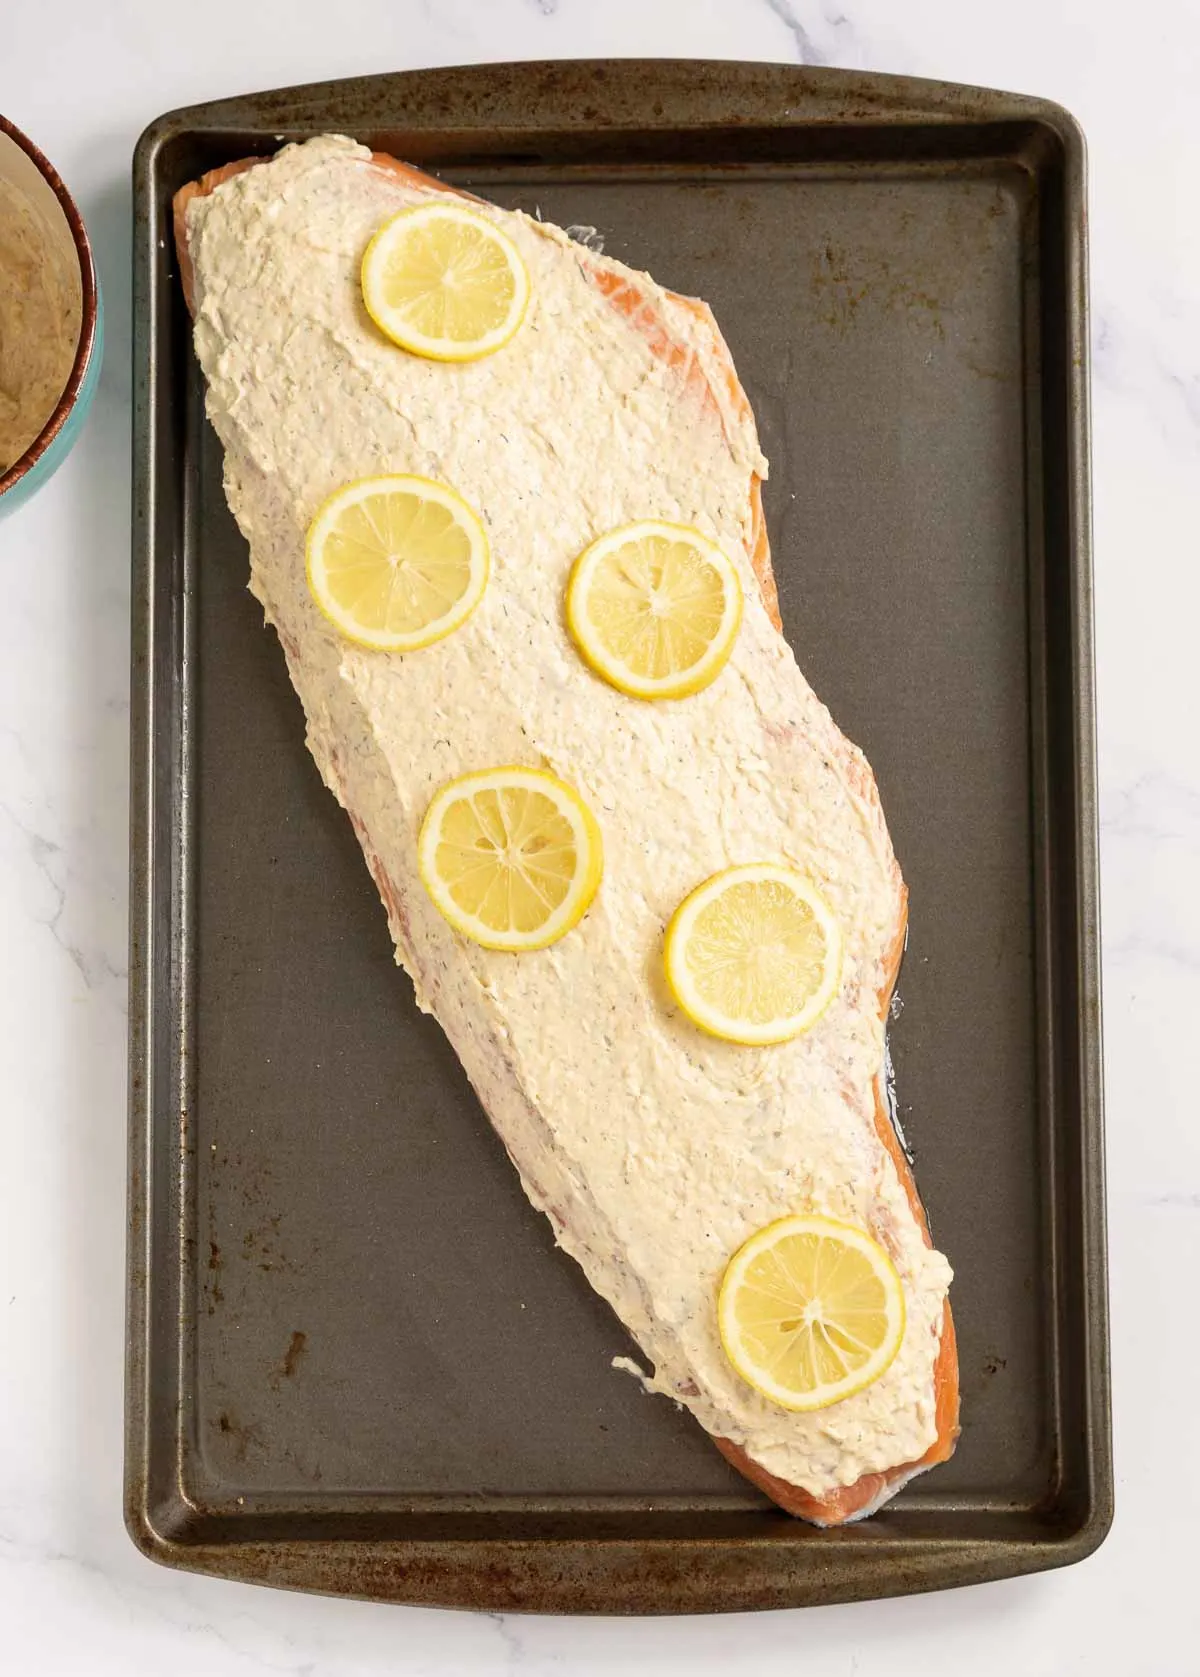 Whole salmon fillet topped with mayo mixture and lemon slices